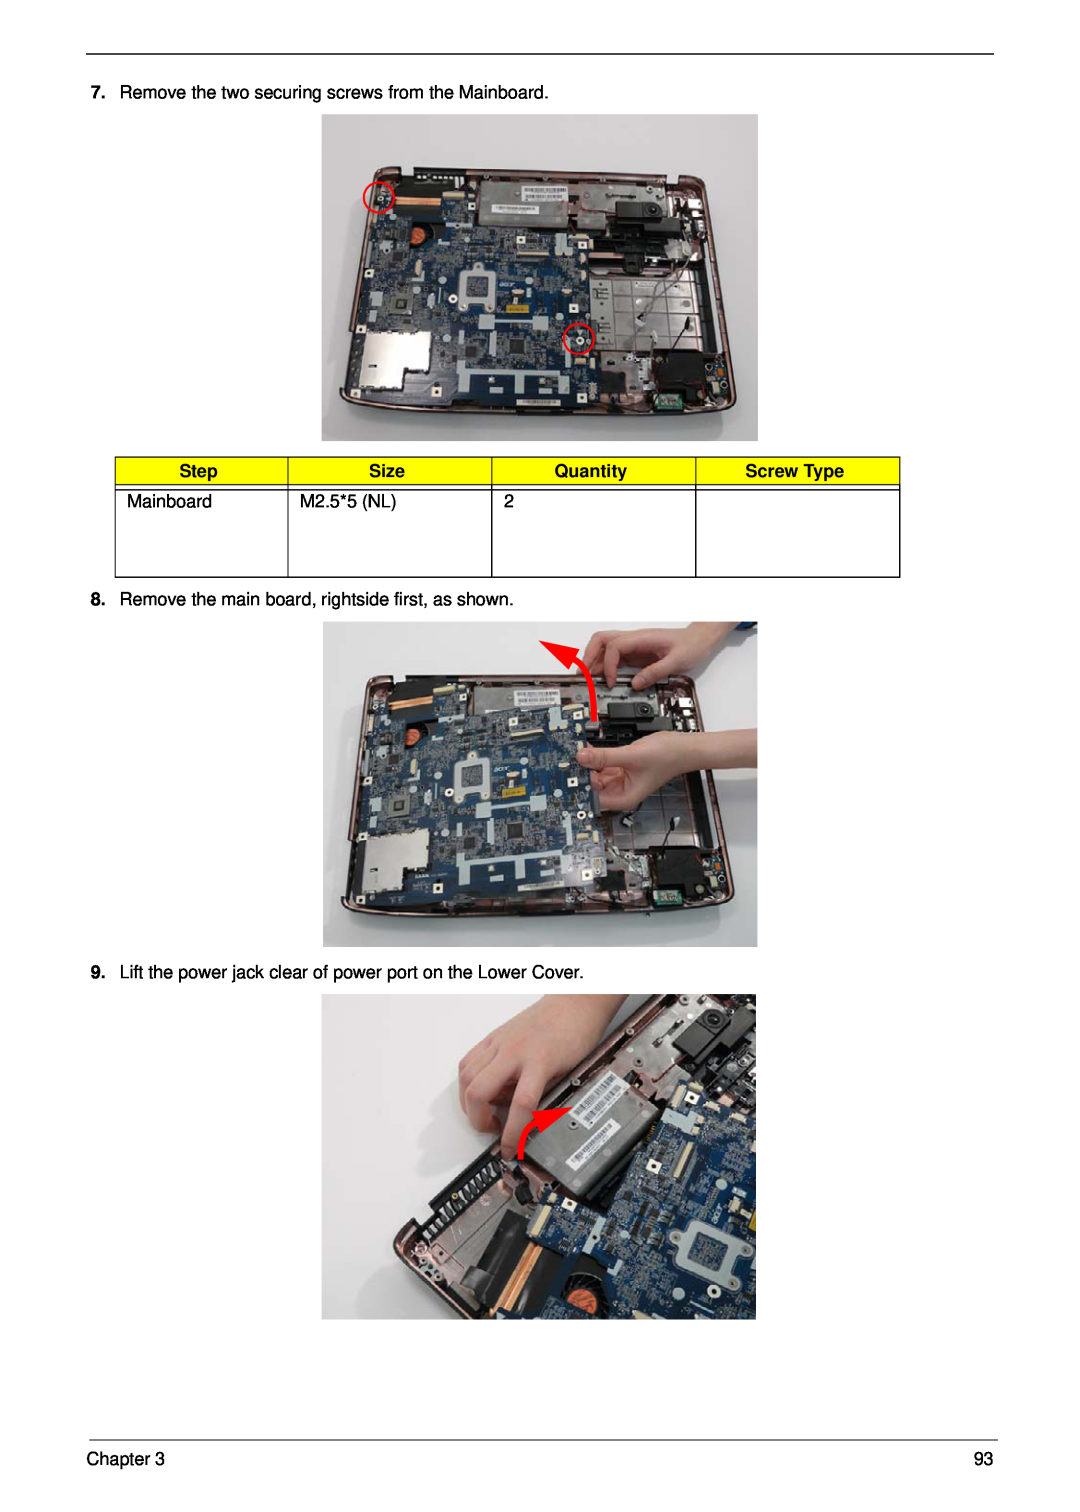 Acer 5530G Remove the two securing screws from the Mainboard, Step, Size, Quantity, Screw Type, M2.5*5 NL, Chapter 